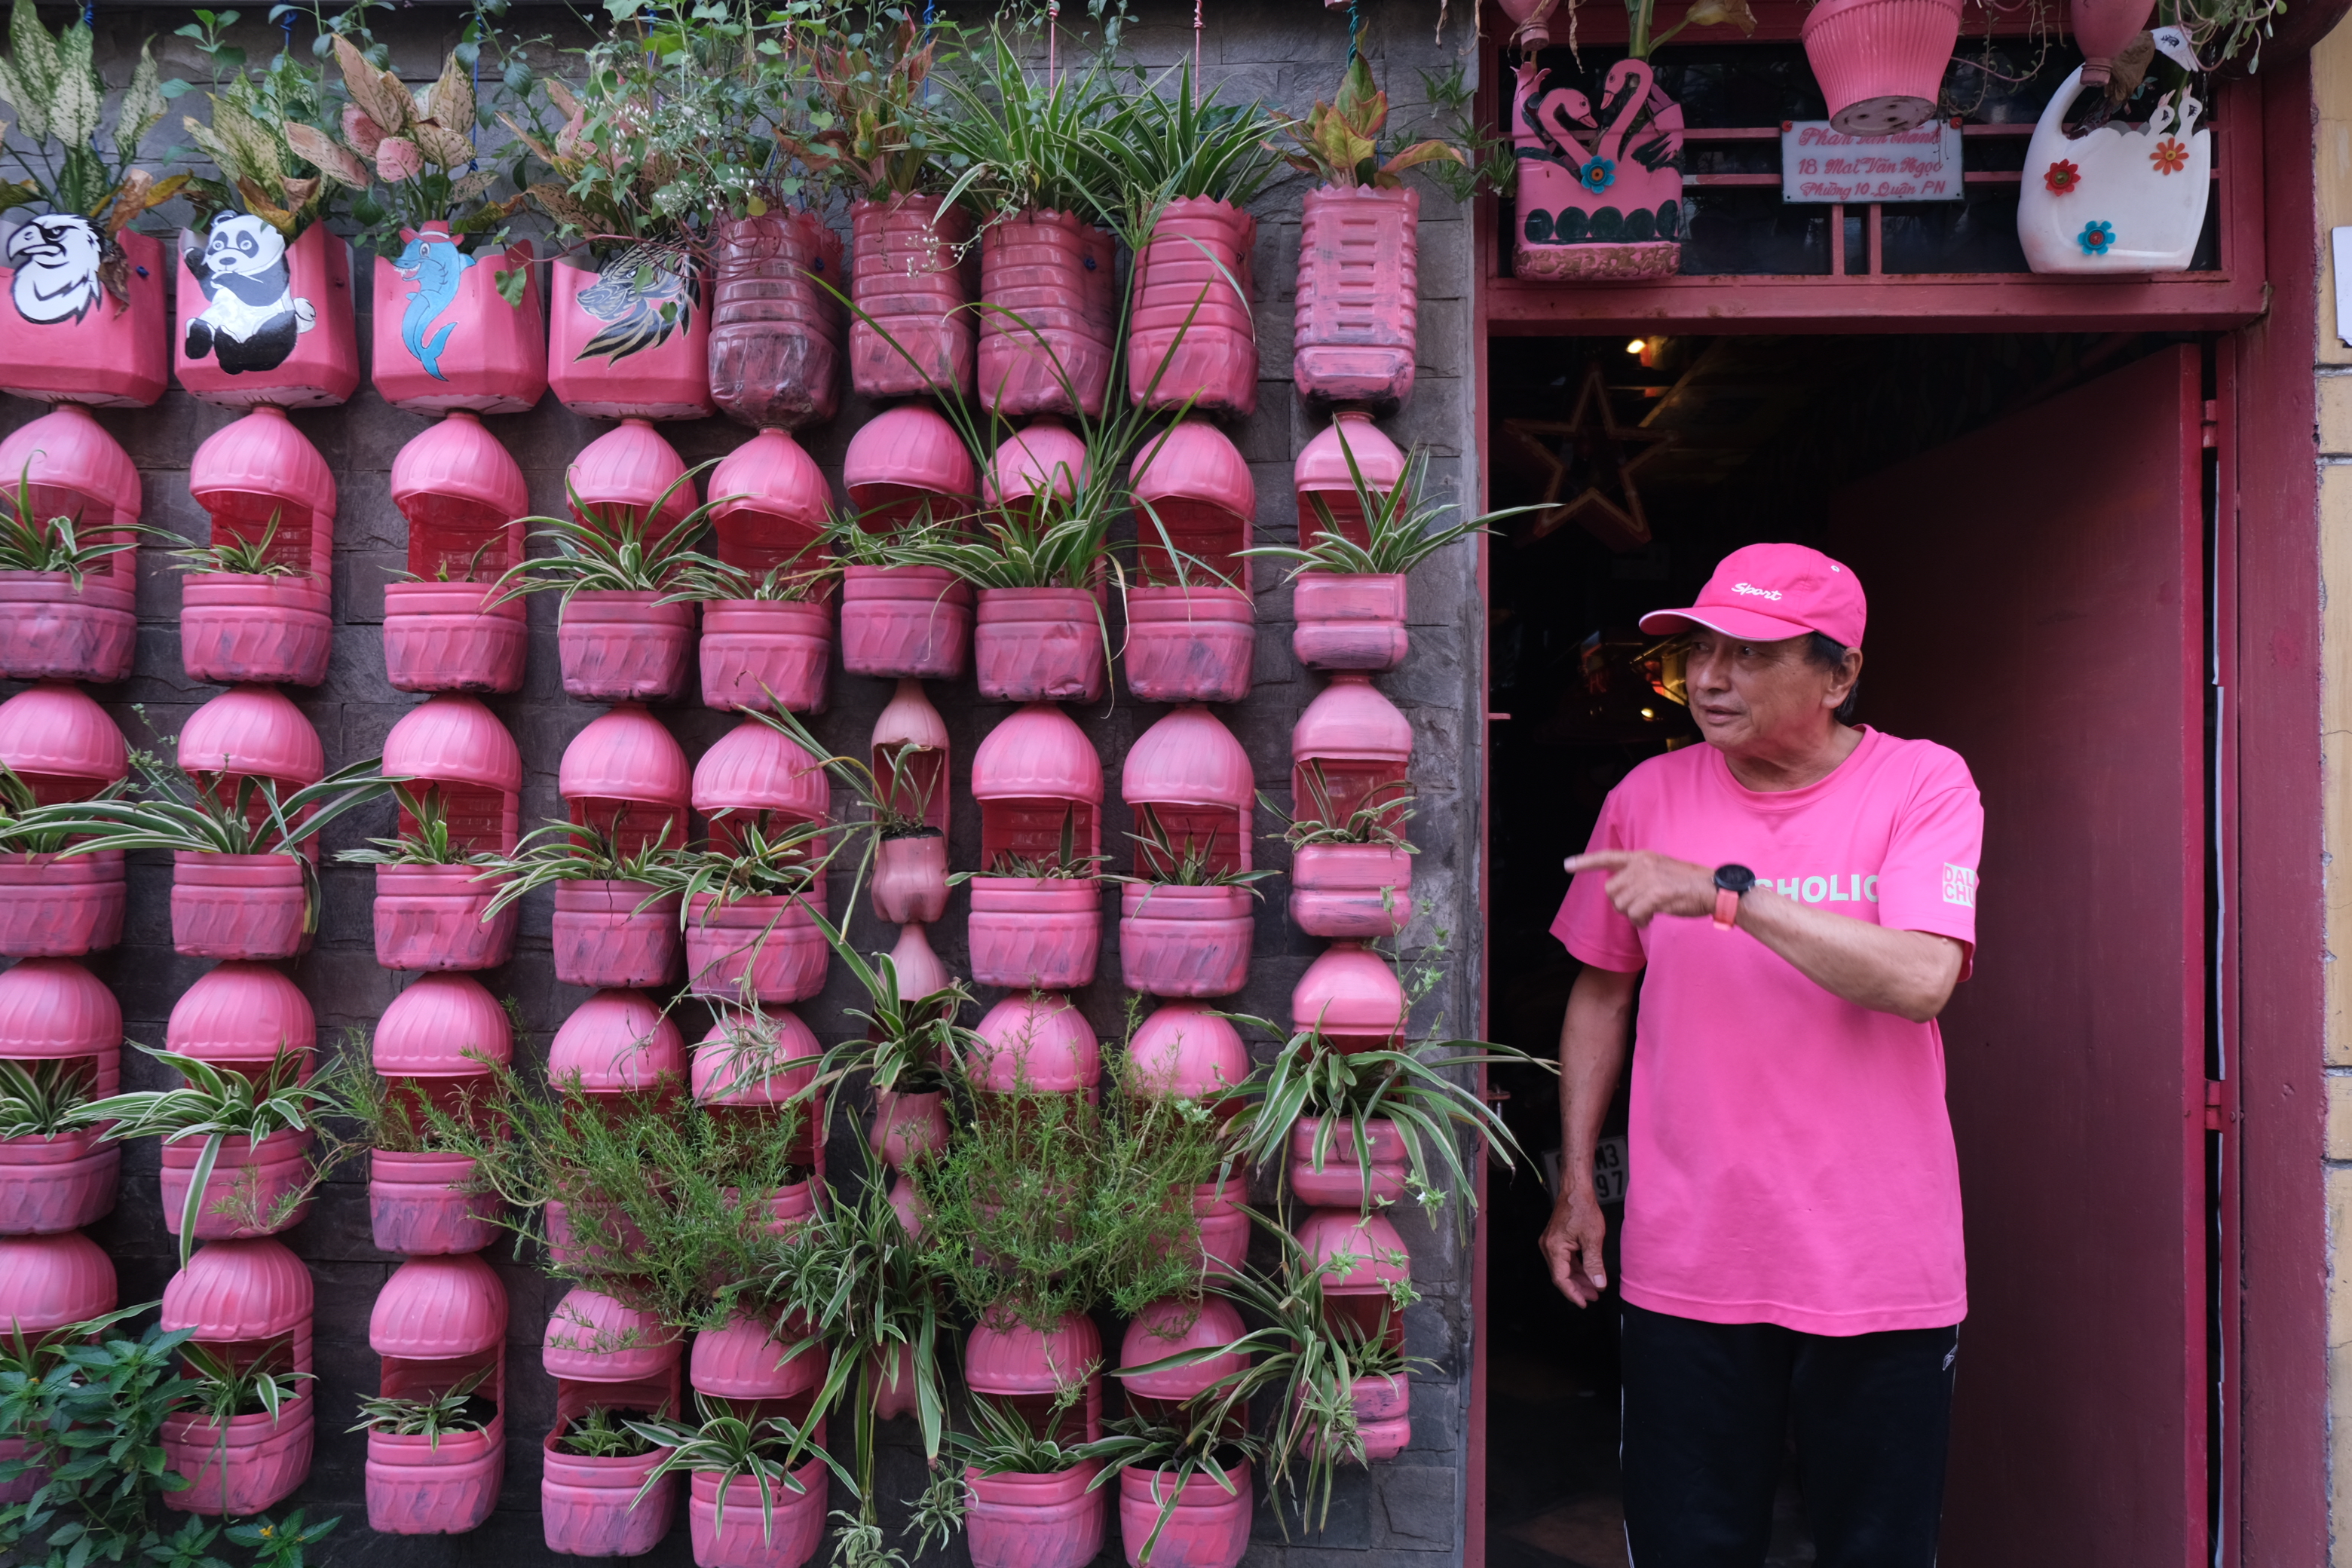 Phan Van Chanh stands next to his pink house in Phu Nhuan District, Ho Chi Minh City. Photo: Ngoc Phuong / Tuoi Tre News